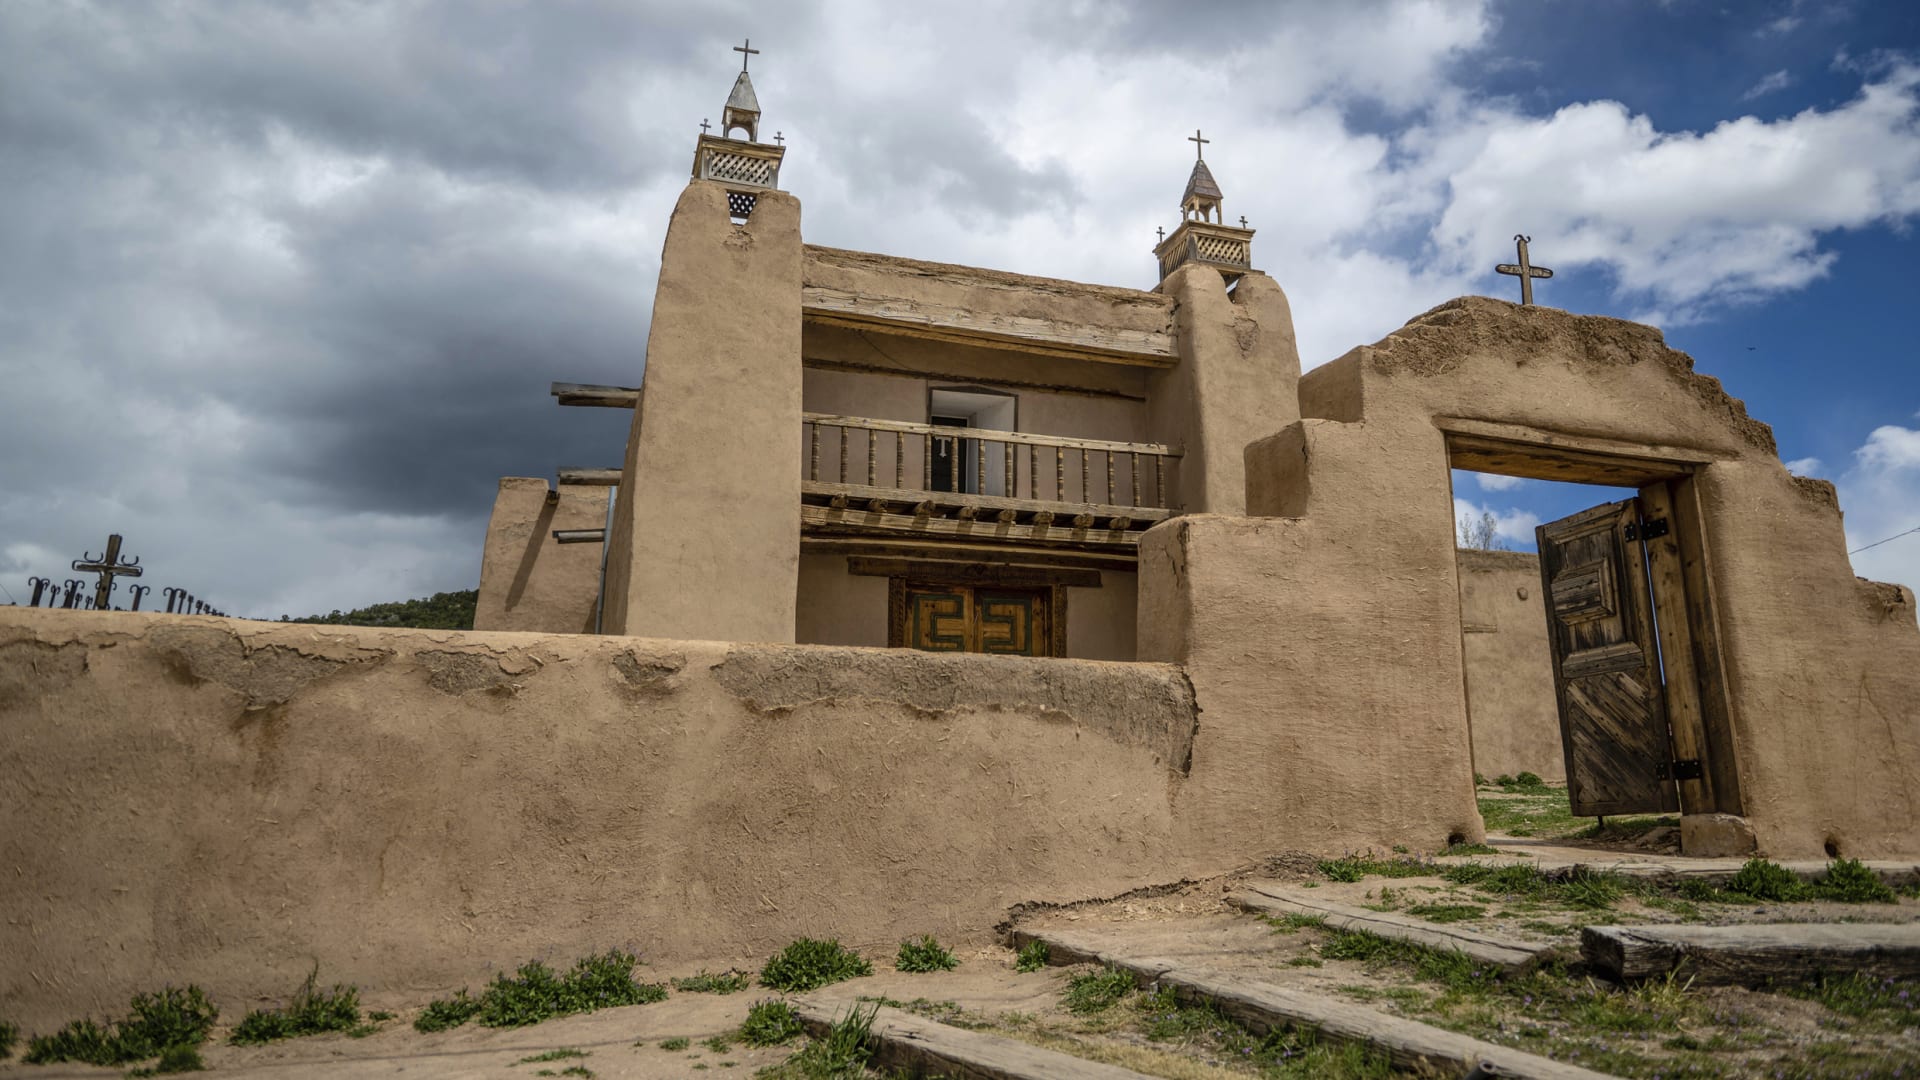 The fight to save New Mexico’s crumbling adobe churches